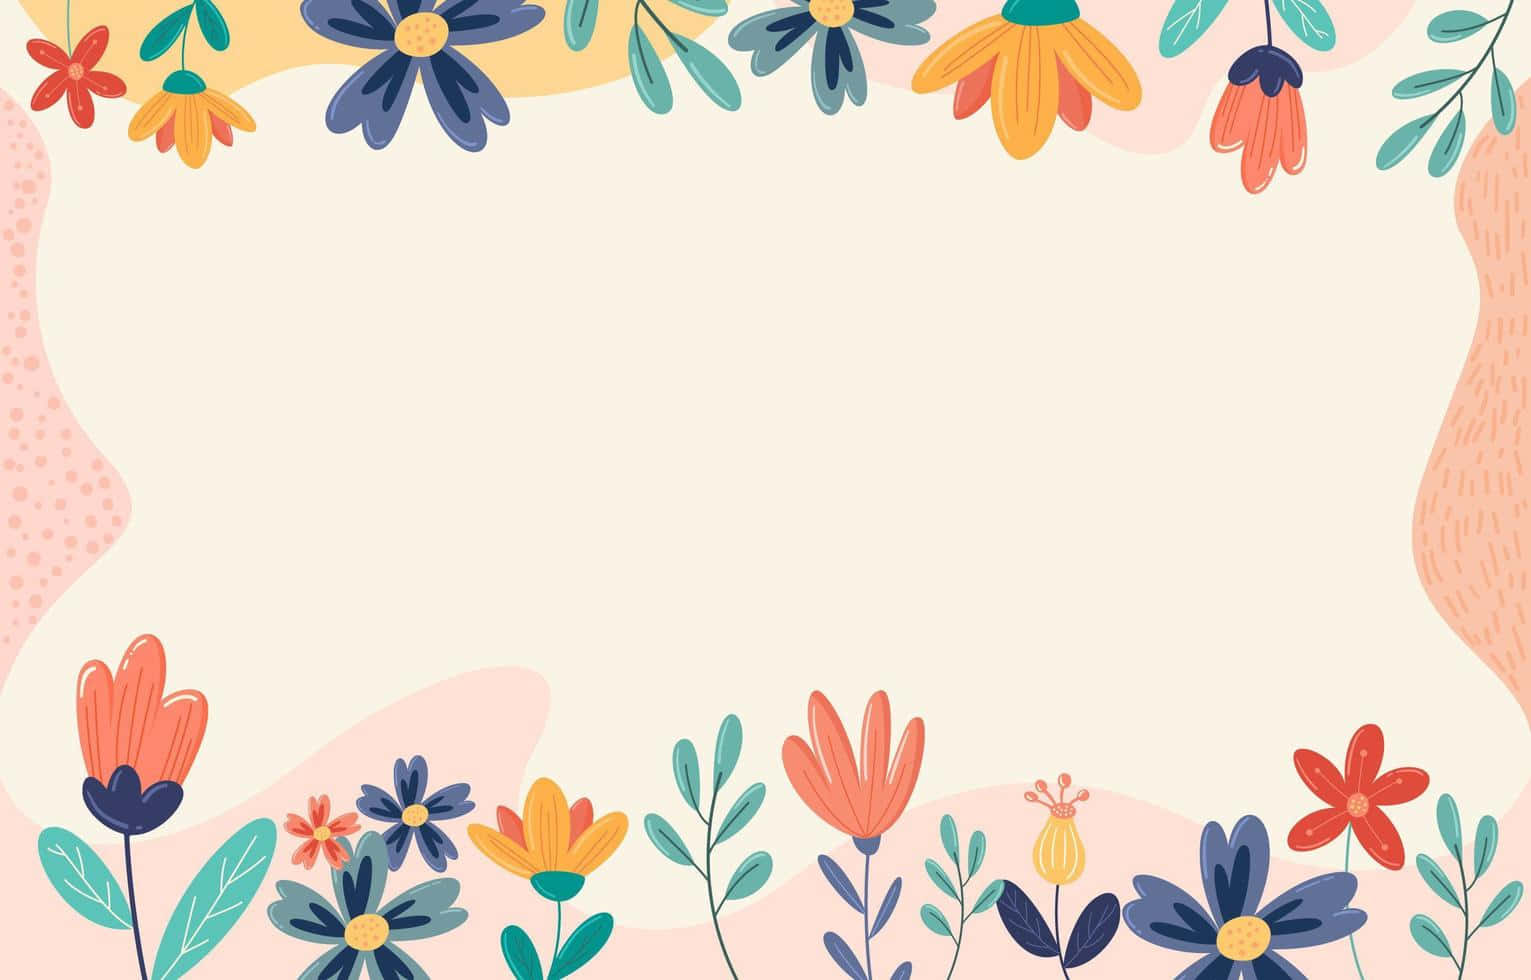 Brighten up your day with a cute floral background!